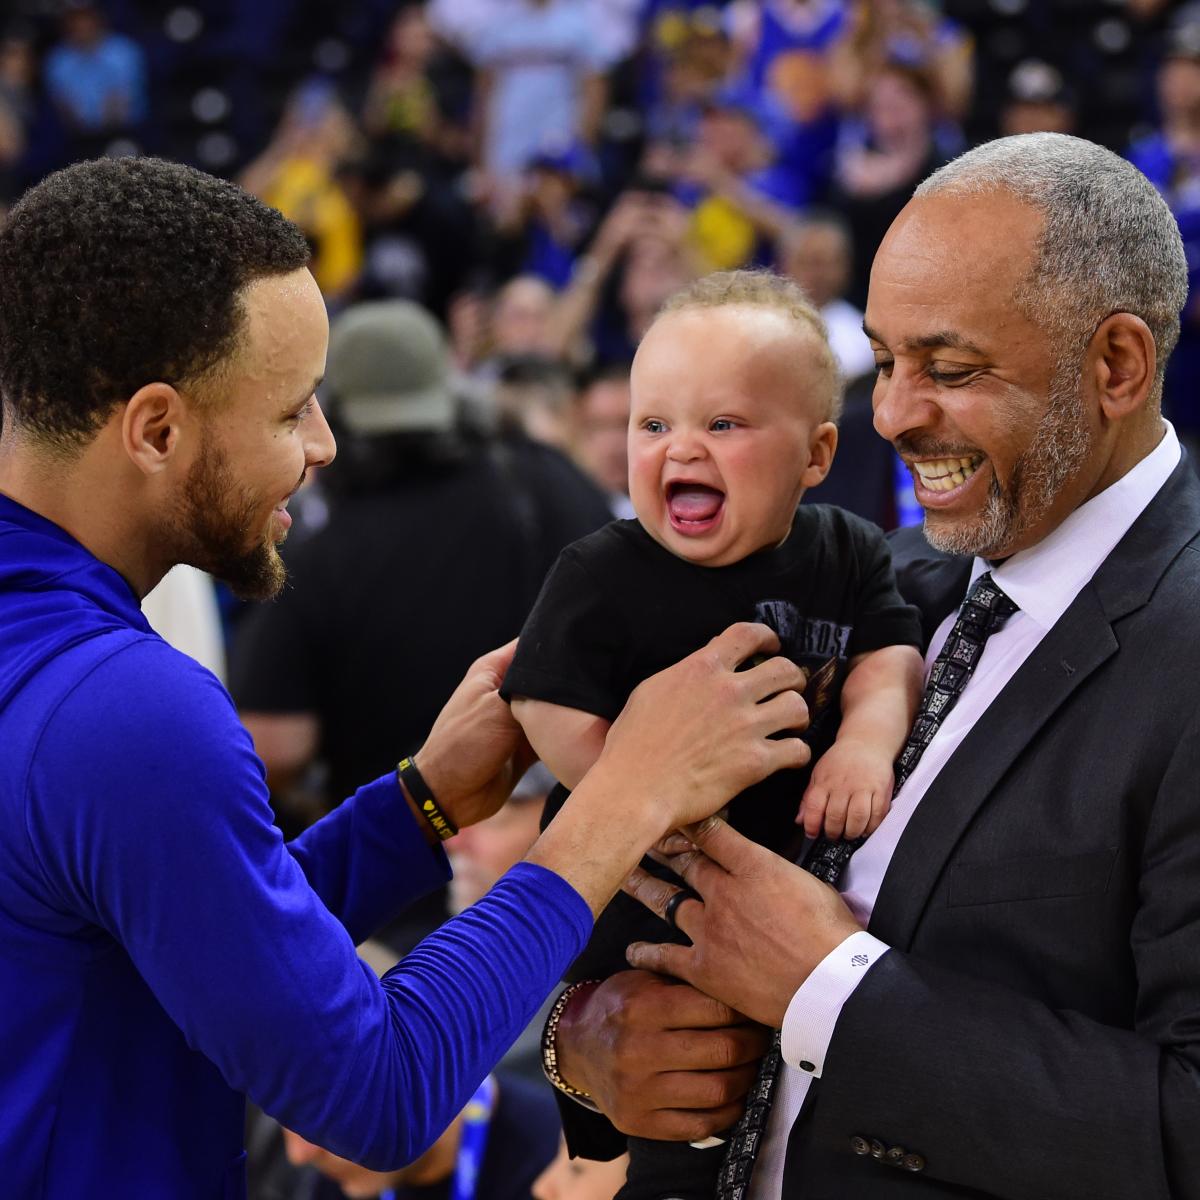 Steph Curry shared parenting wisdom with JaVale McGee